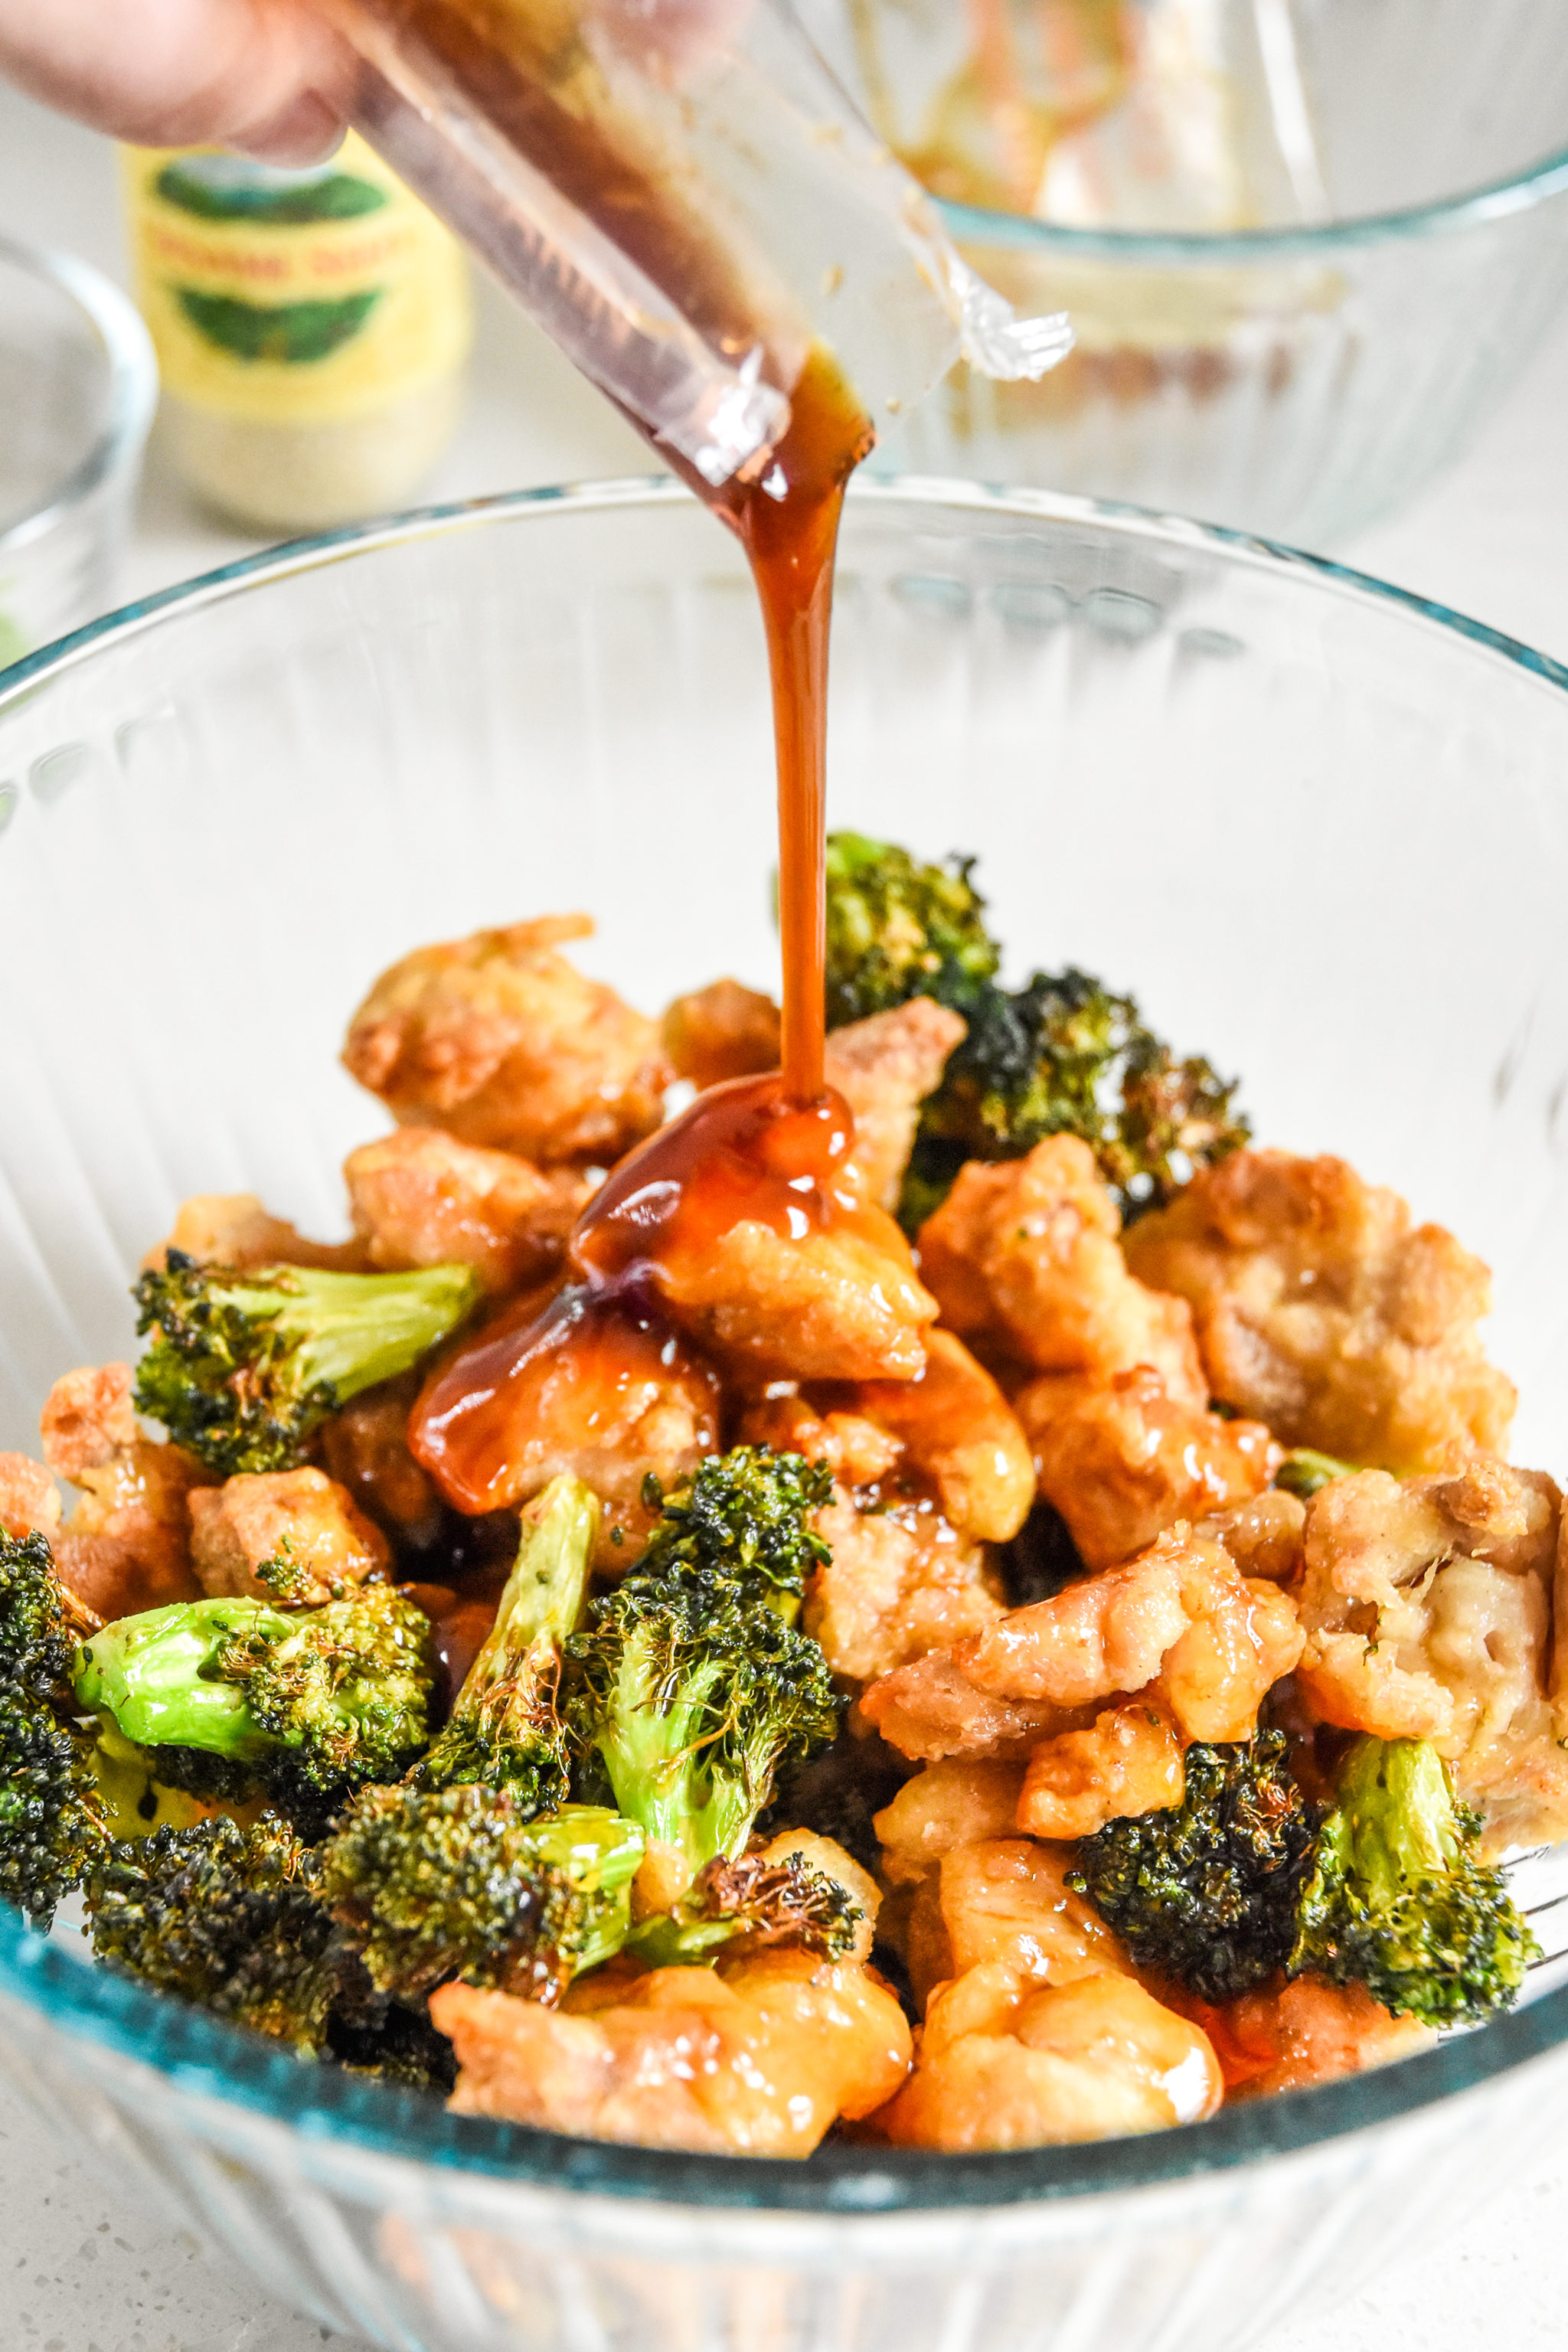 adding sauce to the air fryer trader joes orange chicken and broccoli meal